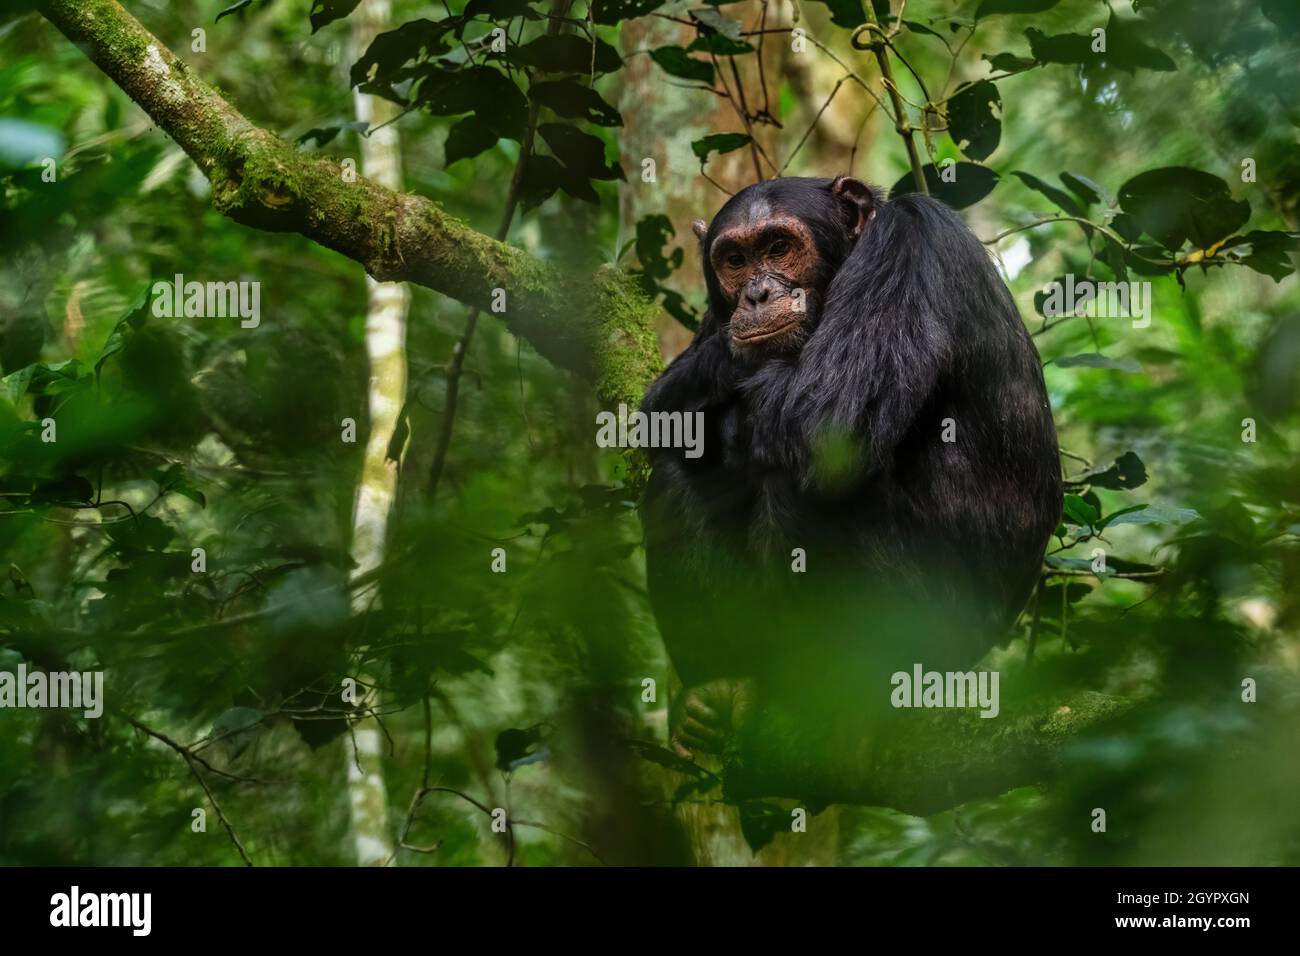 Common Chimpanzee - Pan troglodytes, popular great ape from African forests and woodlands, Kibale forest, Uganda. Stock Photo